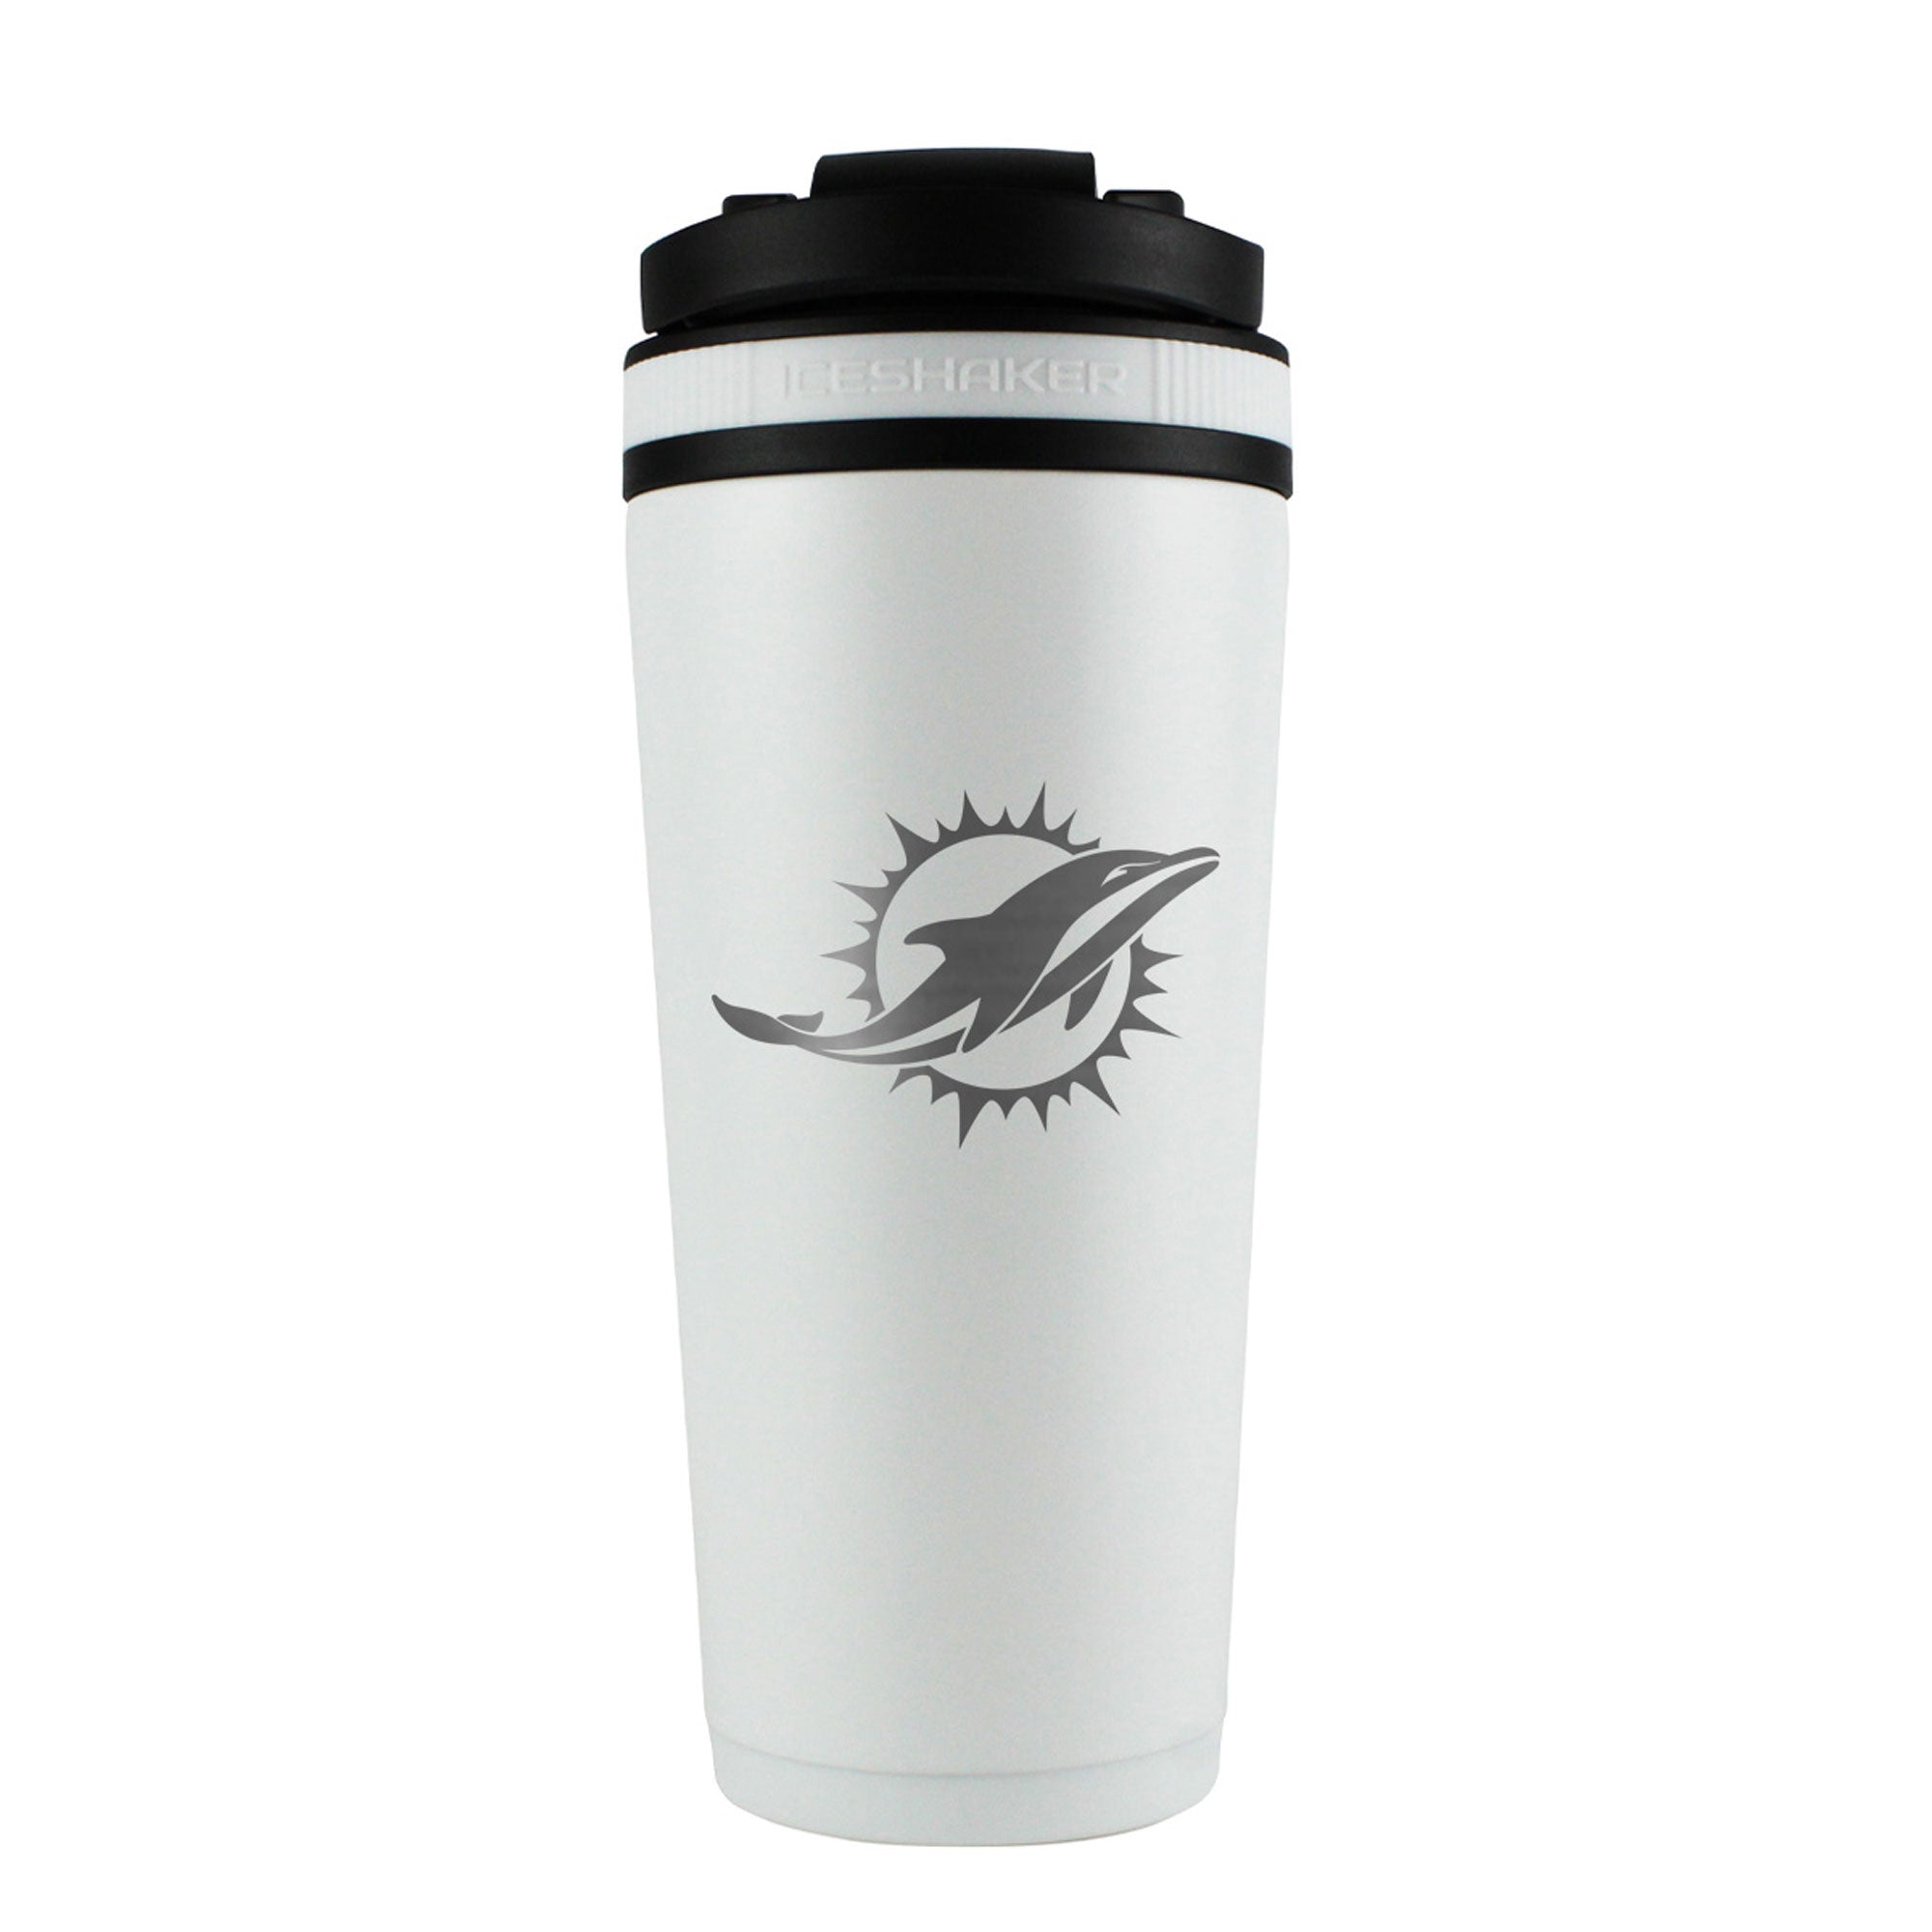 Officially Licensed Miami Dolphins 26oz Ice Shaker - White